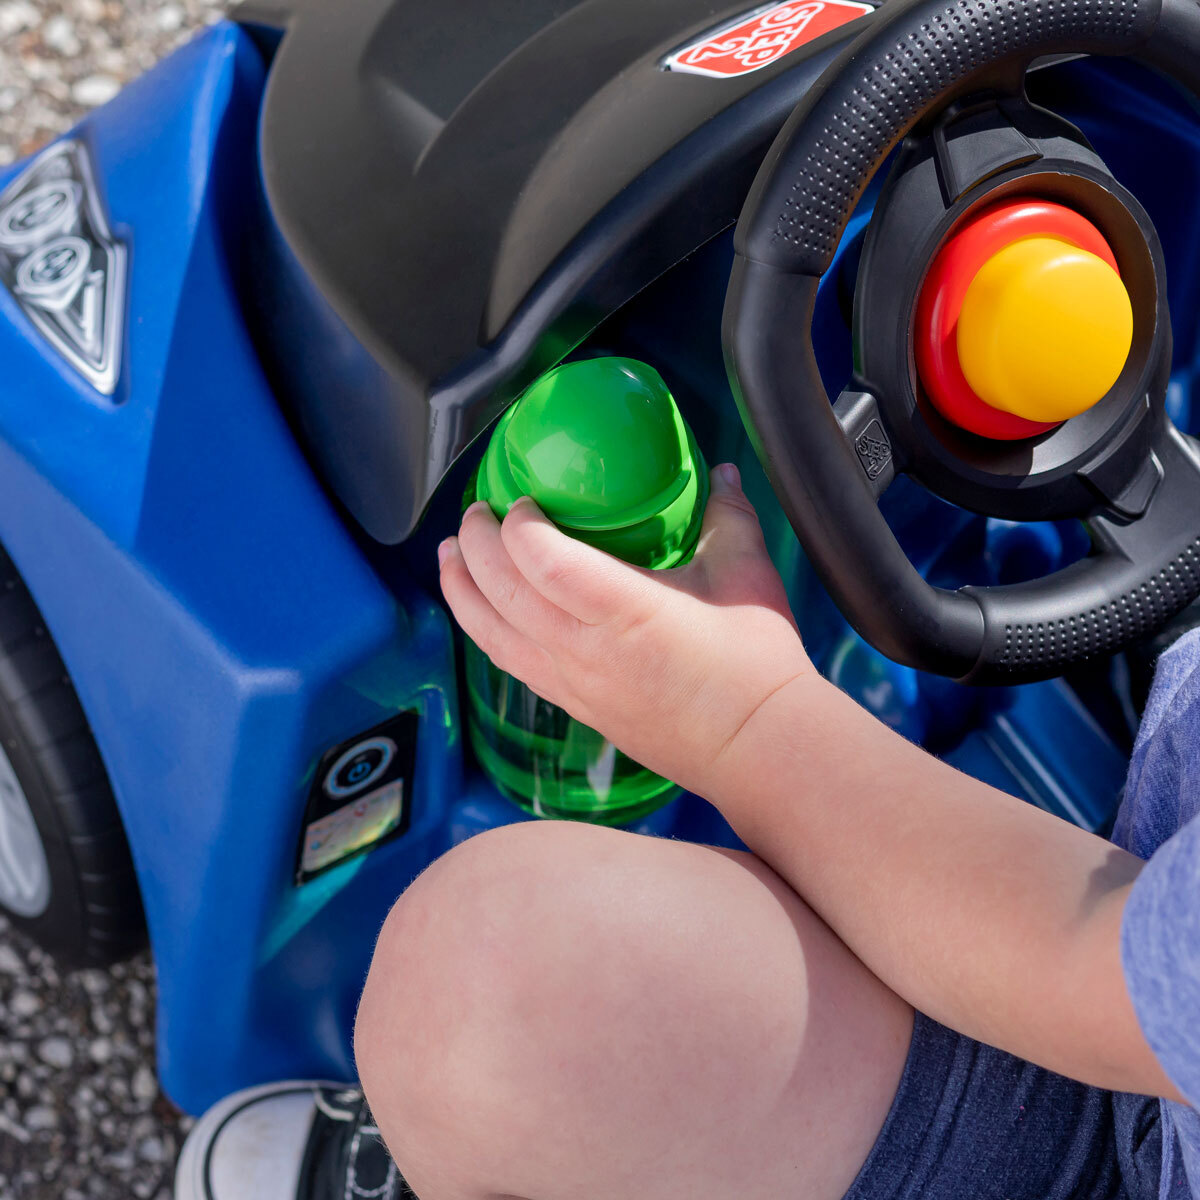 Buy Push Around Buggy GT Blue Cup Holder Image at Costco.co.uk